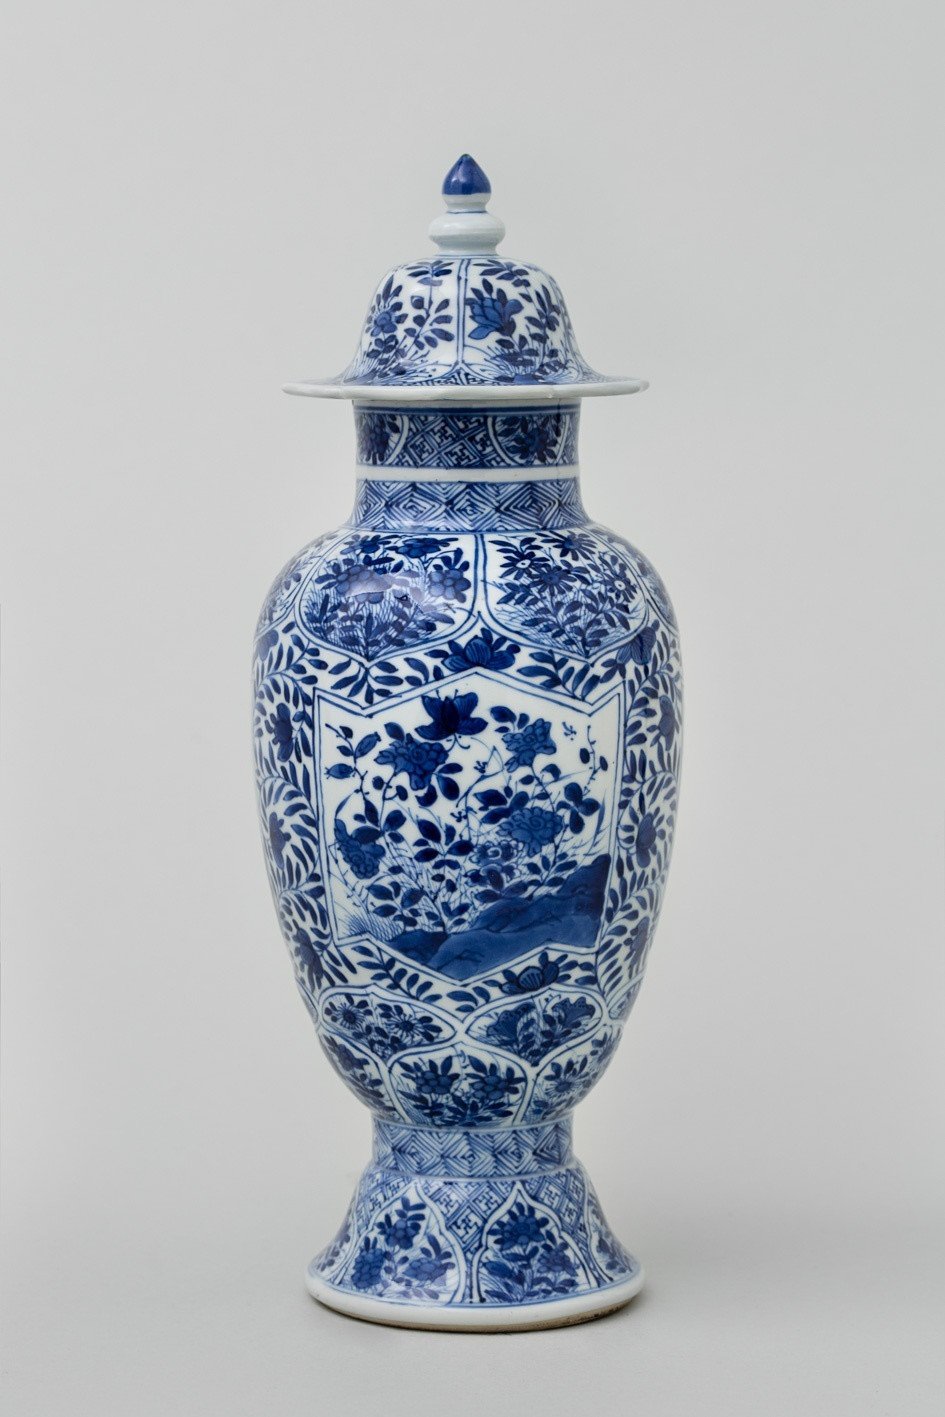 23 Fabulous Chinese Porcelain Vase 2022 free download chinese porcelain vase of a chinese blue and white baluster vase and cover kangxi 1662 172 inside a chinese blue and white baluster vase and cover